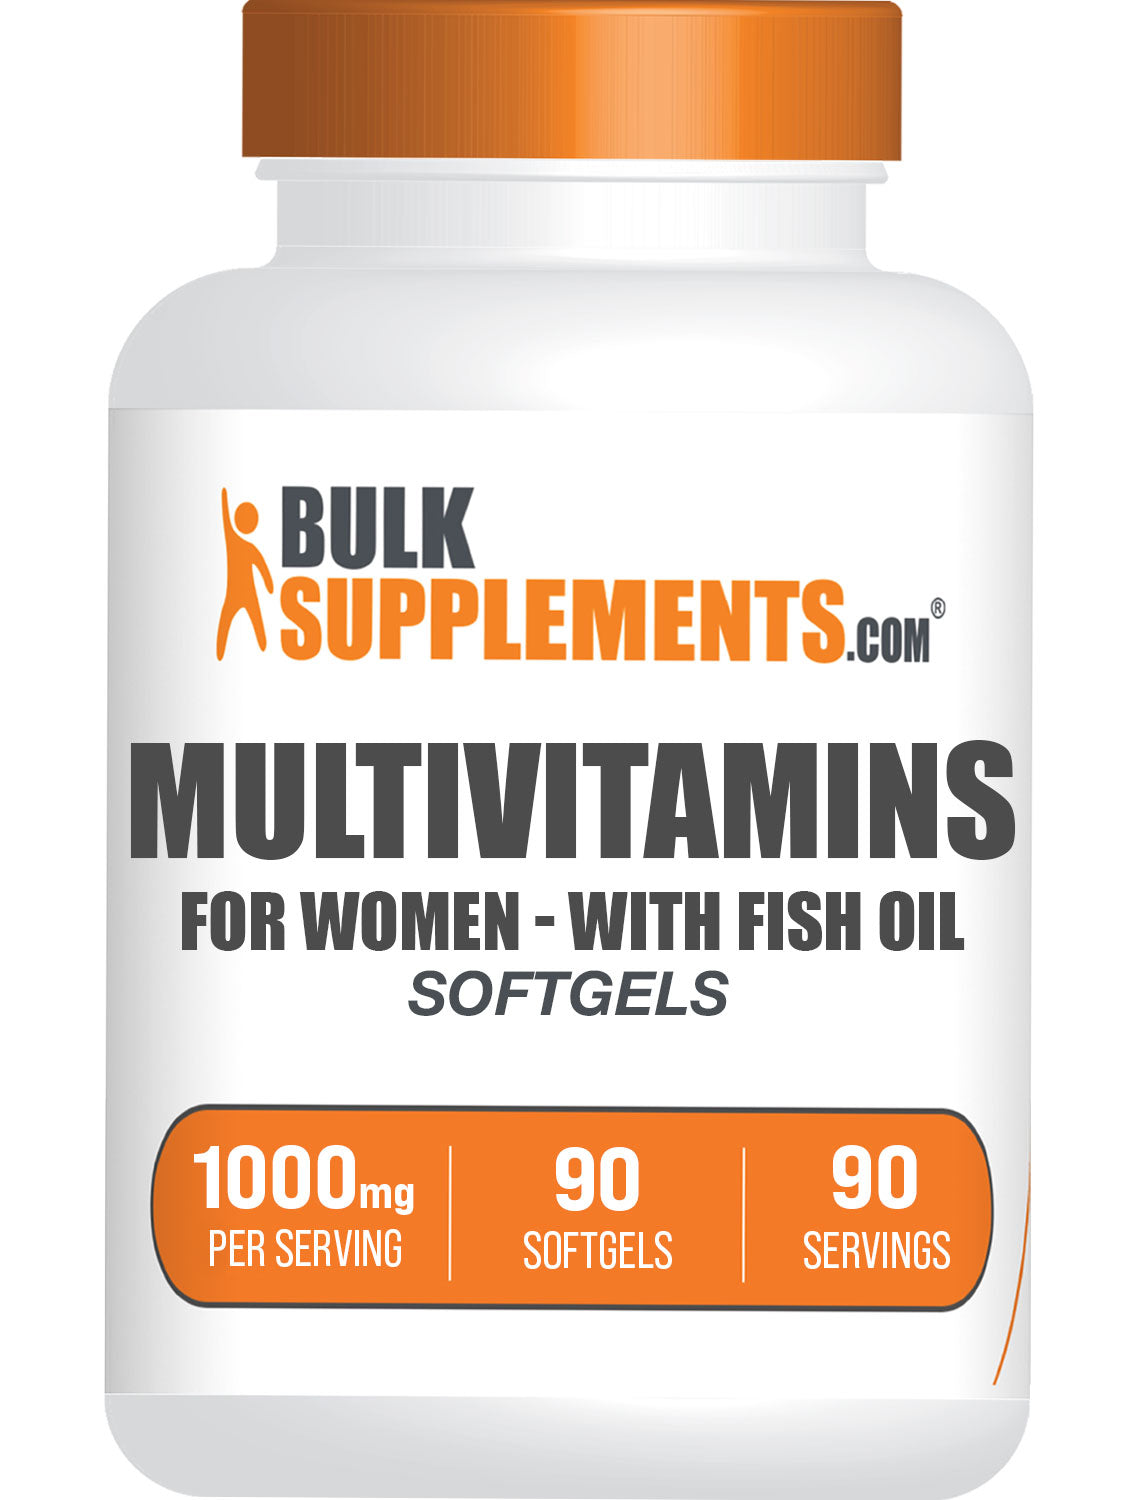 Multivitamin for women with fish oil 1000mg